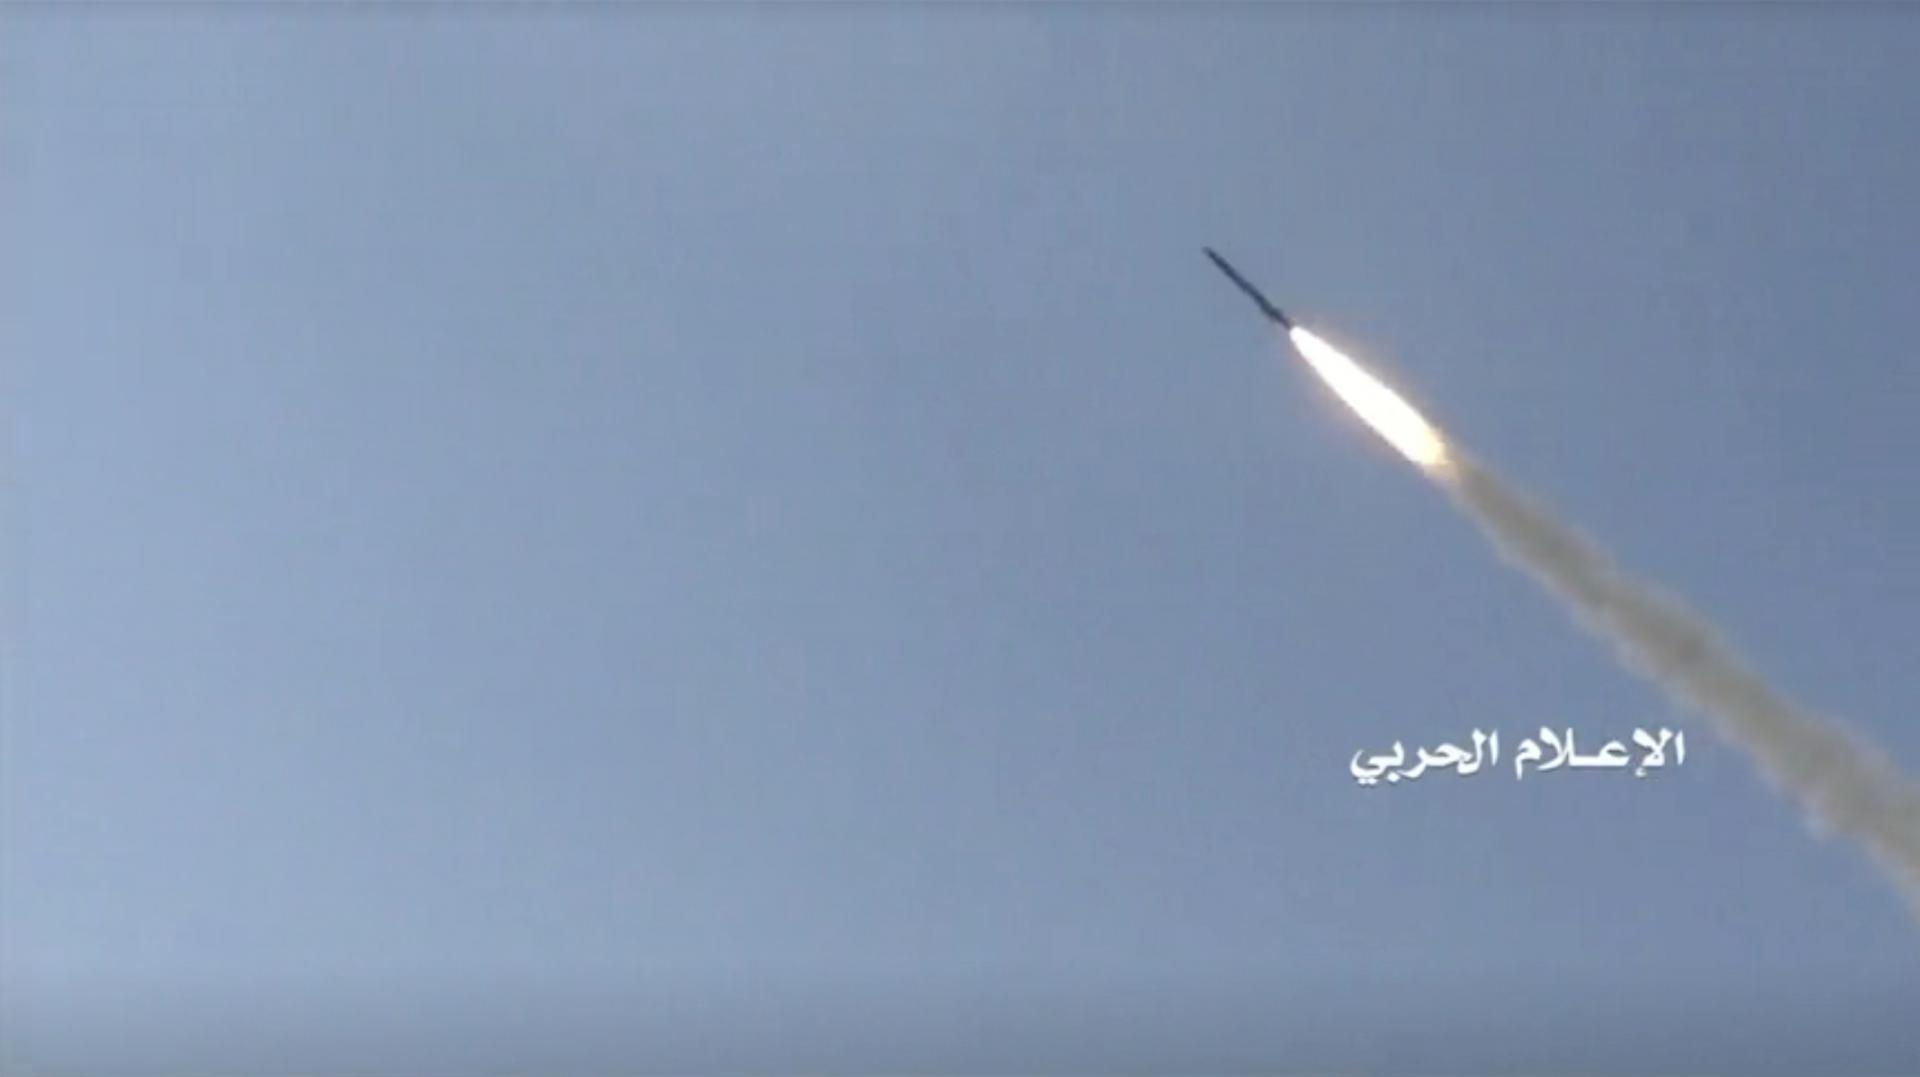 A cruise missile called 'Quds' is seen after it was launched from an unidentified location in Yemen